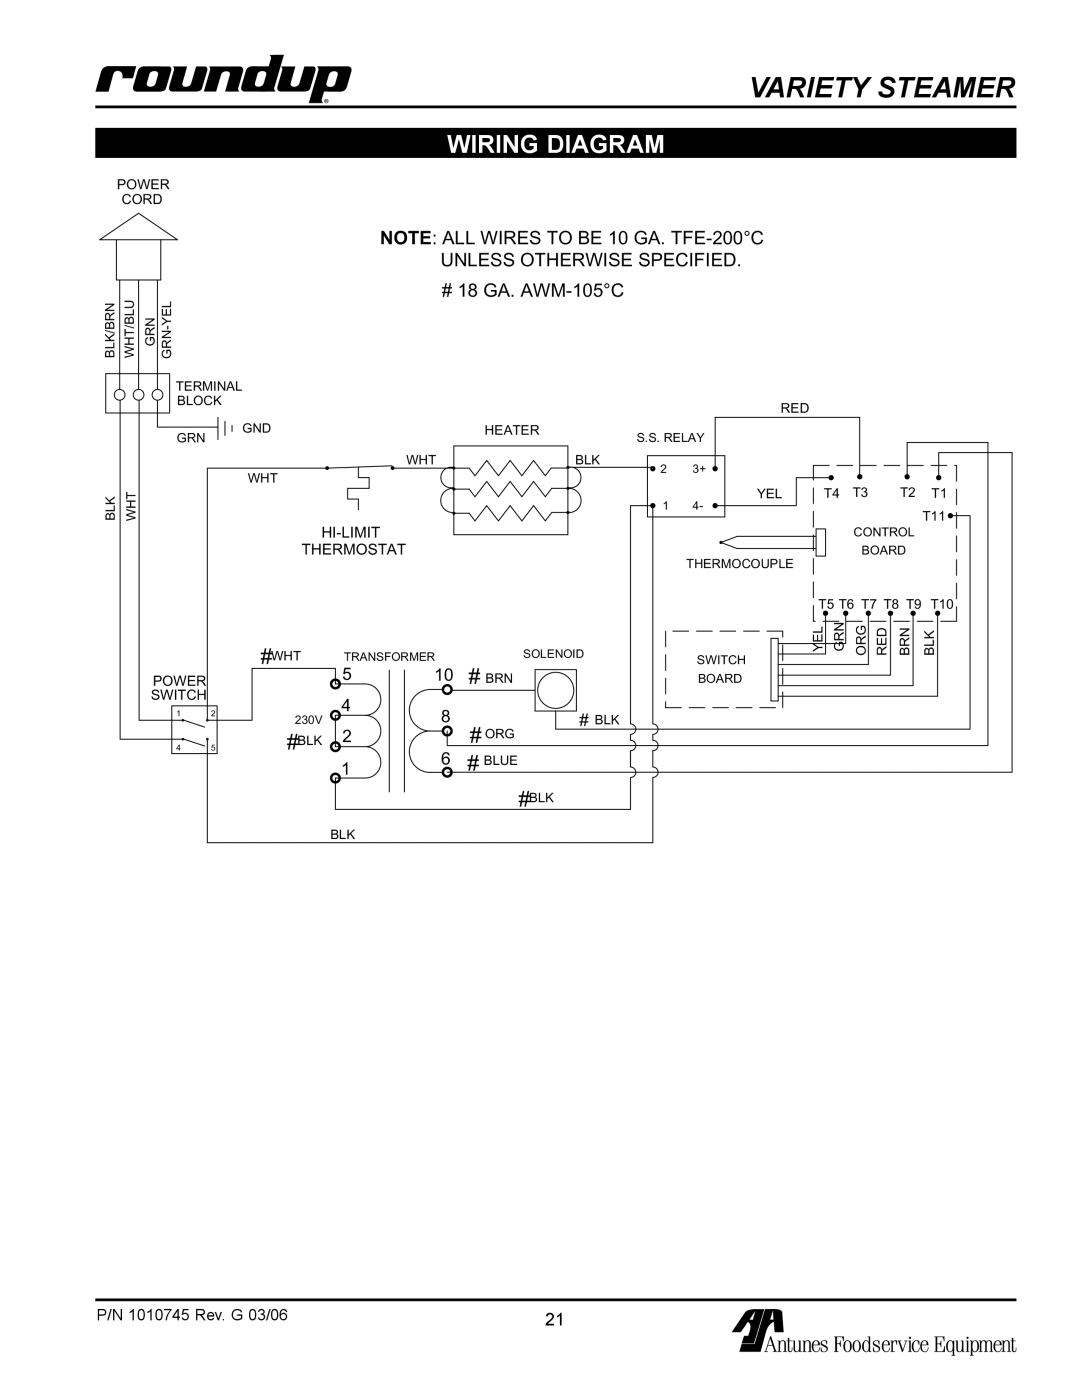 Antunes, AJ VS-350 Wiring Diagram, Variety Steamer, NOTE ALL WIRES TO BE 10 GA. TFE-200C, Unless Otherwise Specified 